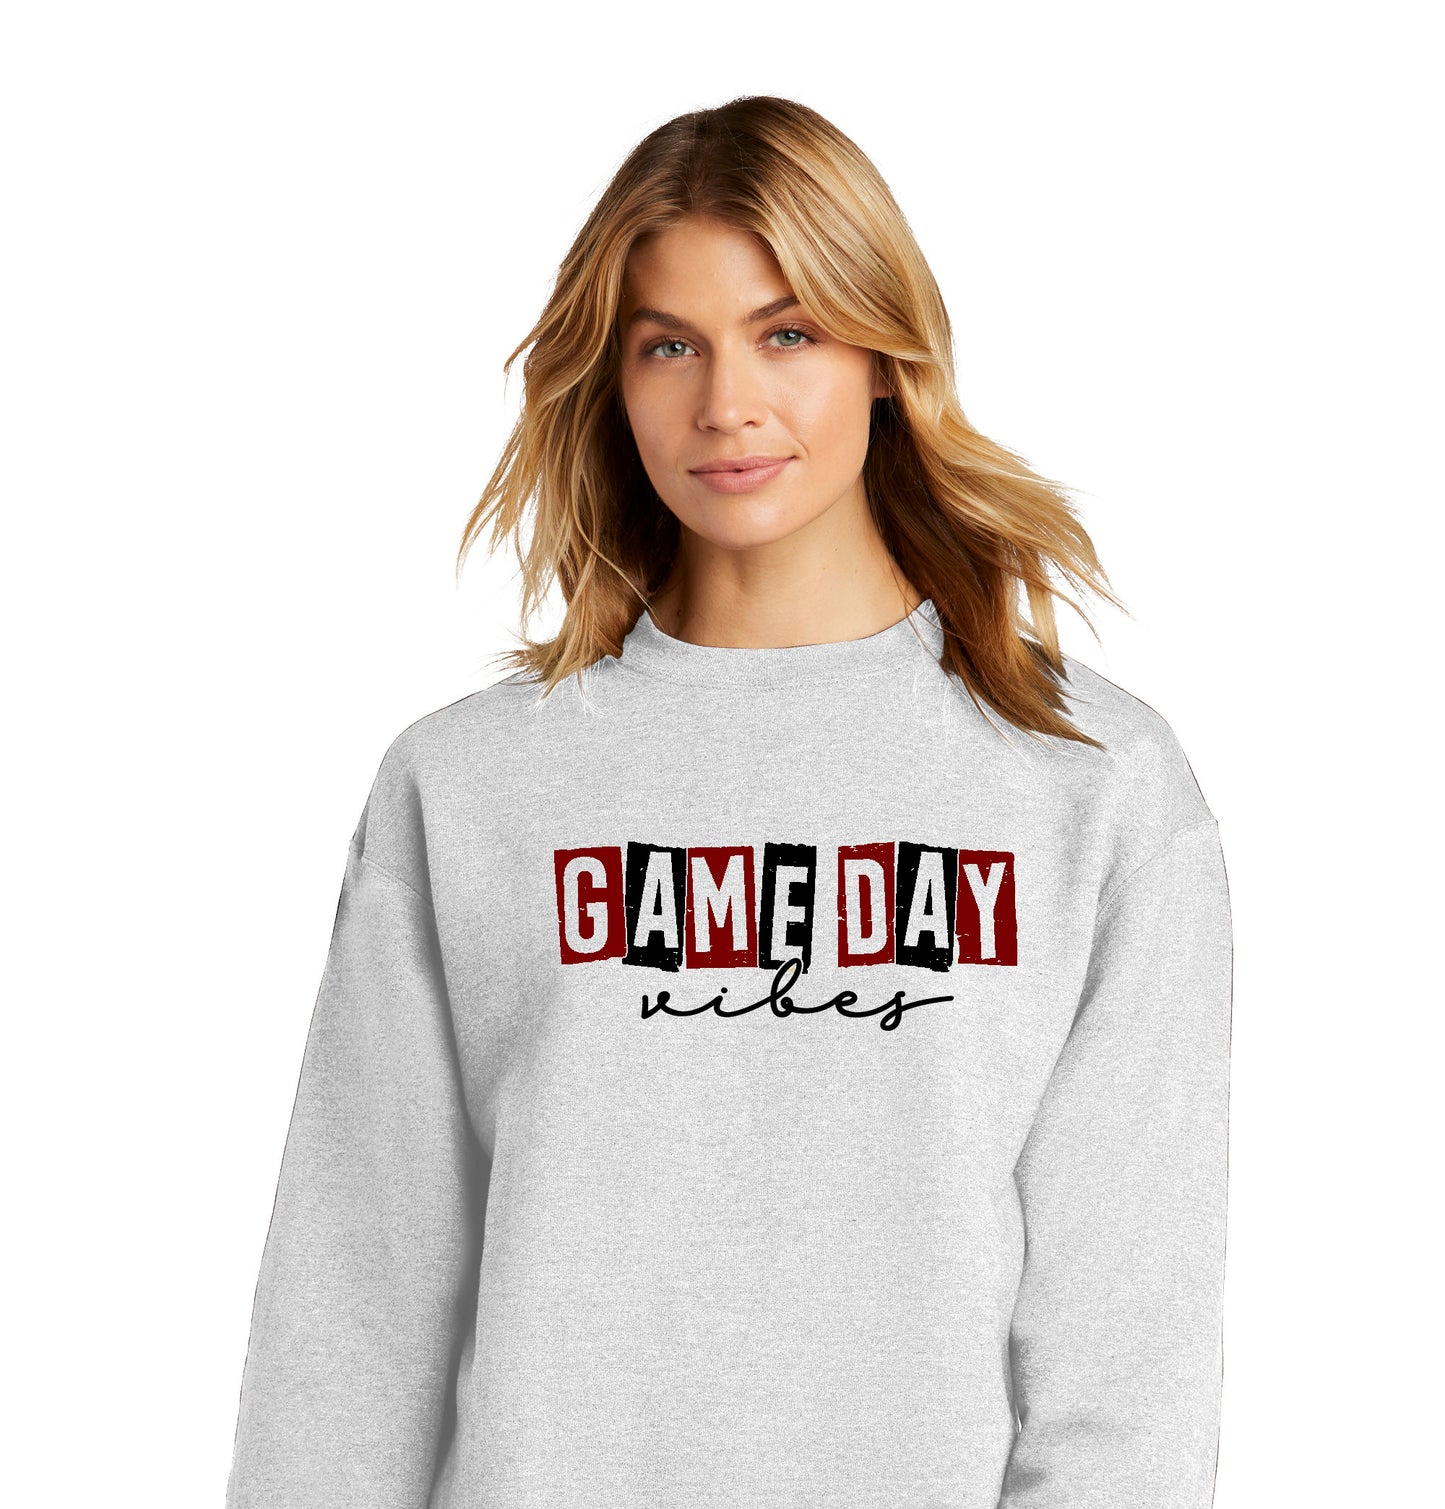 Custom Game Day Vibes Champion Sweatshirt Personalized with Team Colors